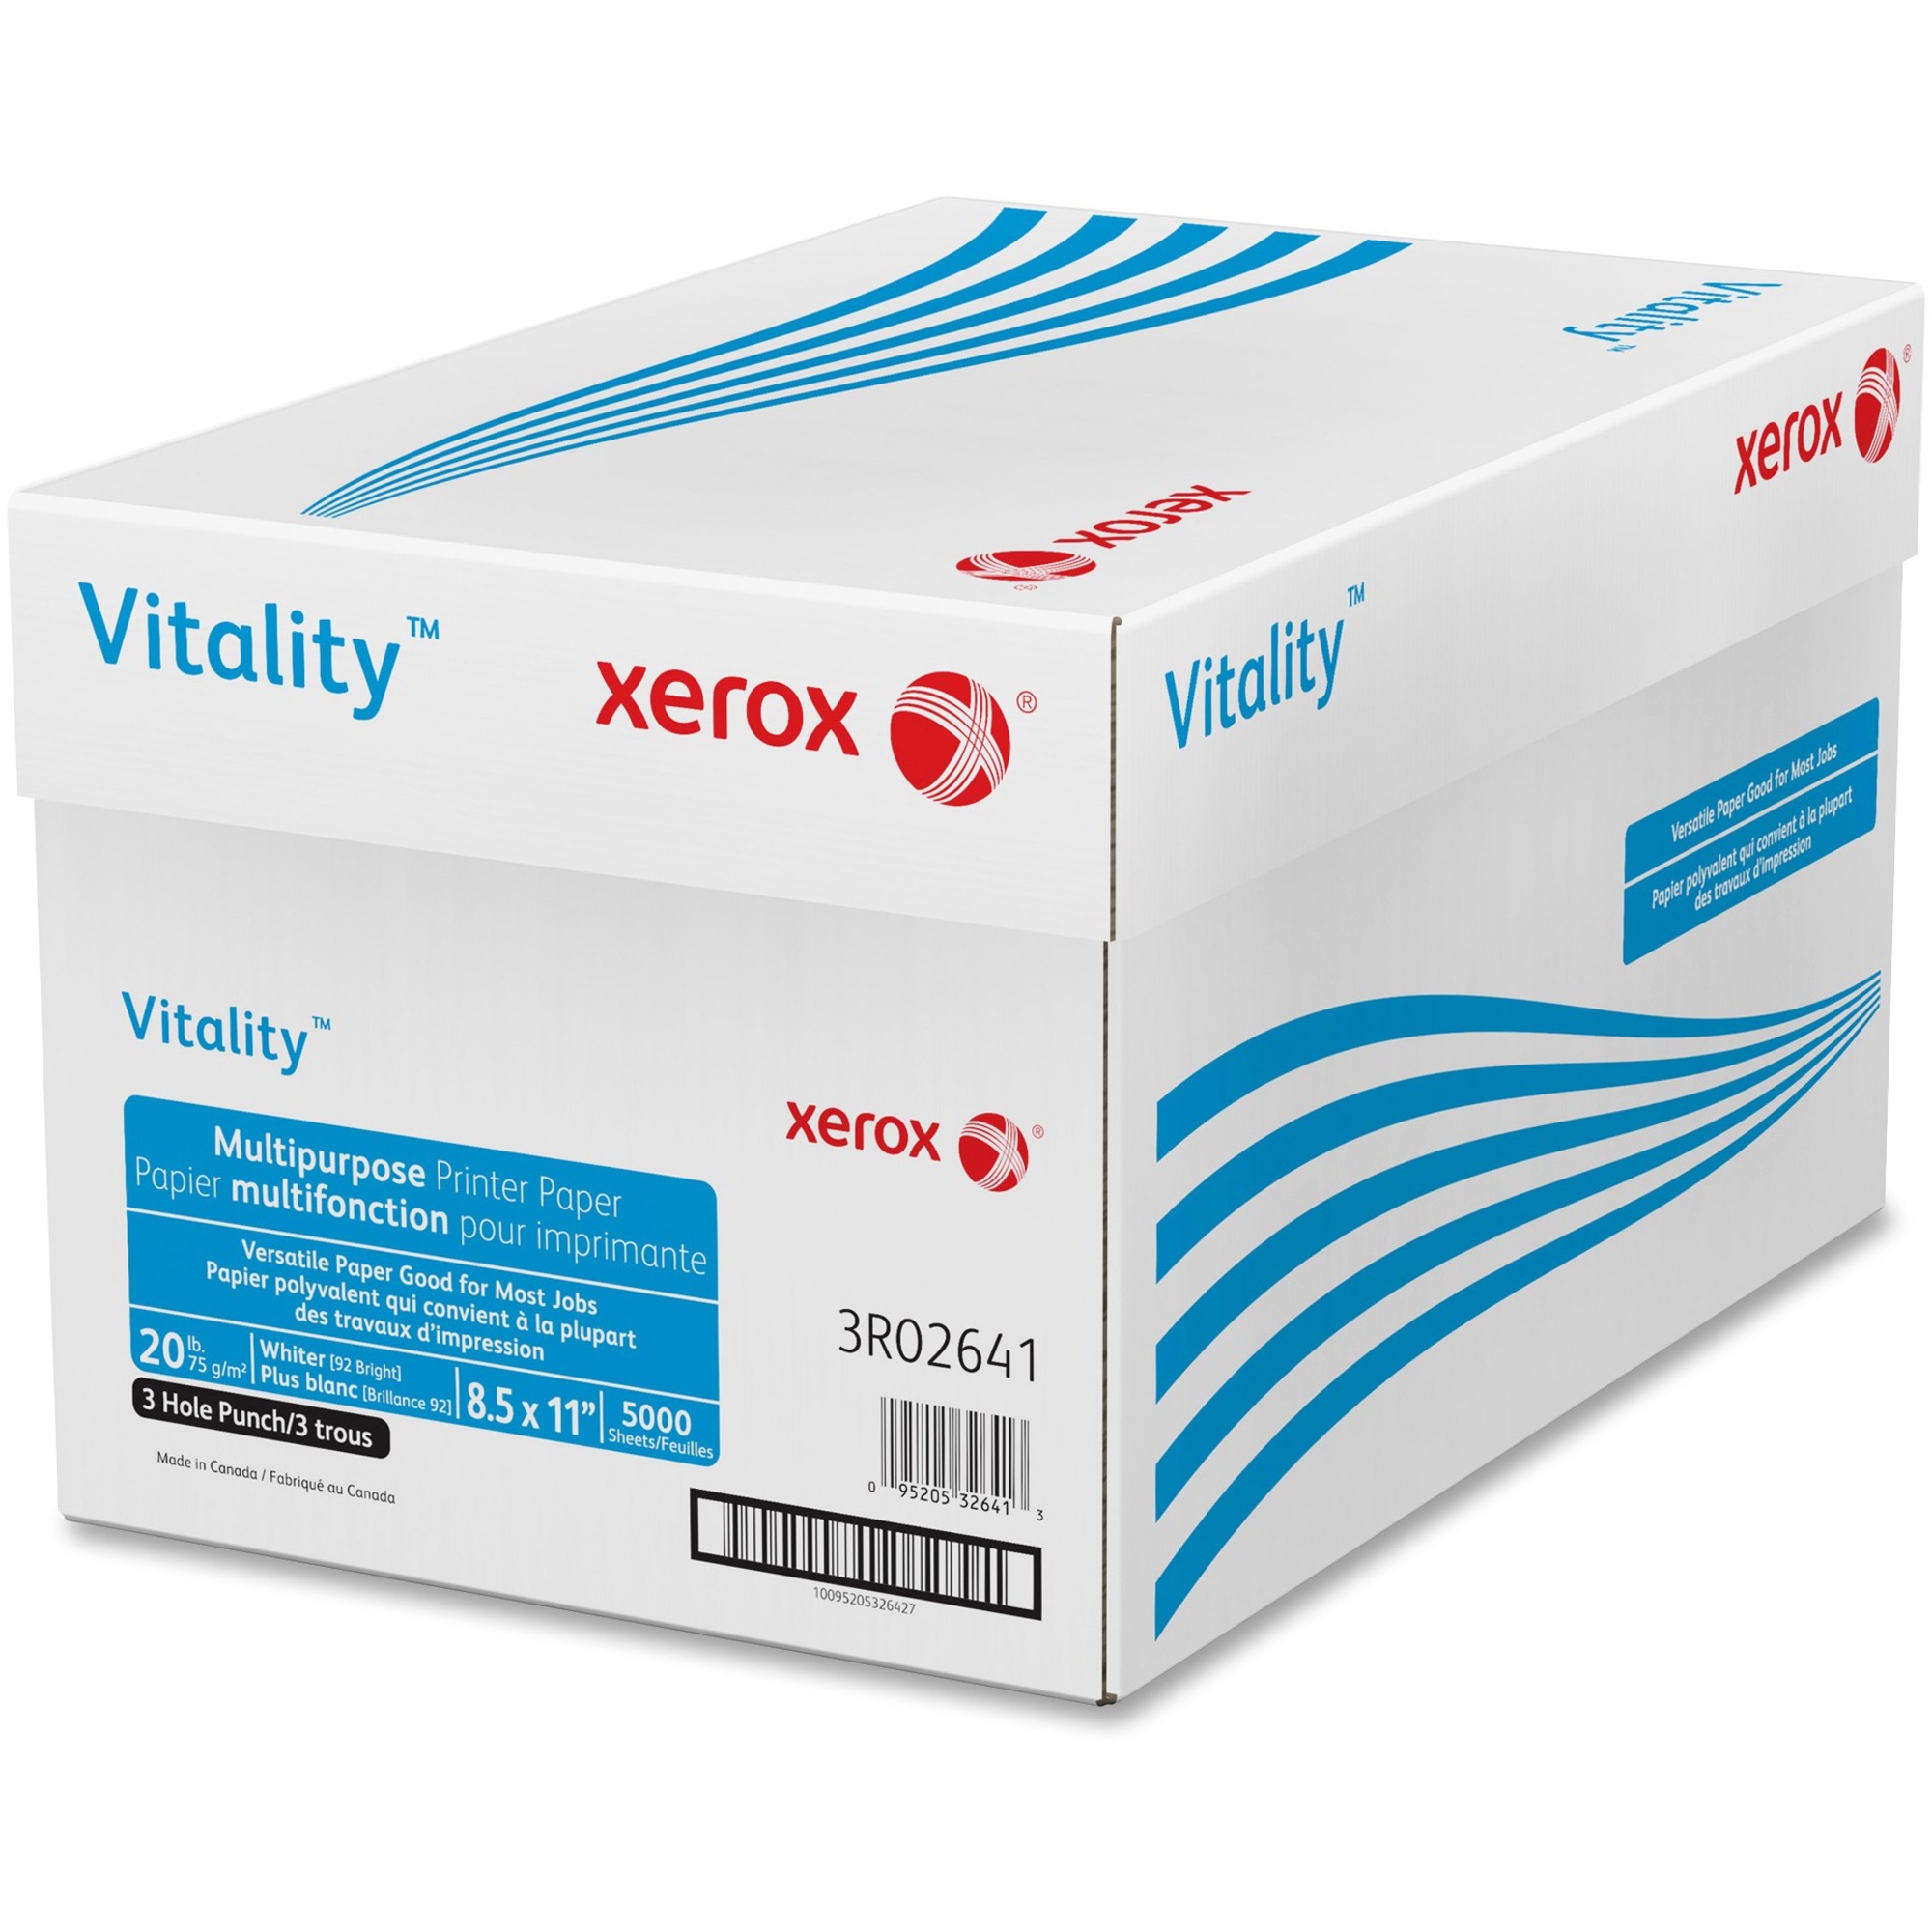 Xerox Vitality Index Copier Paper, Letter Size (8 1/2 x 11), Pack Of 250  Sheets, 110 Lb, 96 (U.S.) Brightness, FSC Certified, White, Case Of 8 Reams